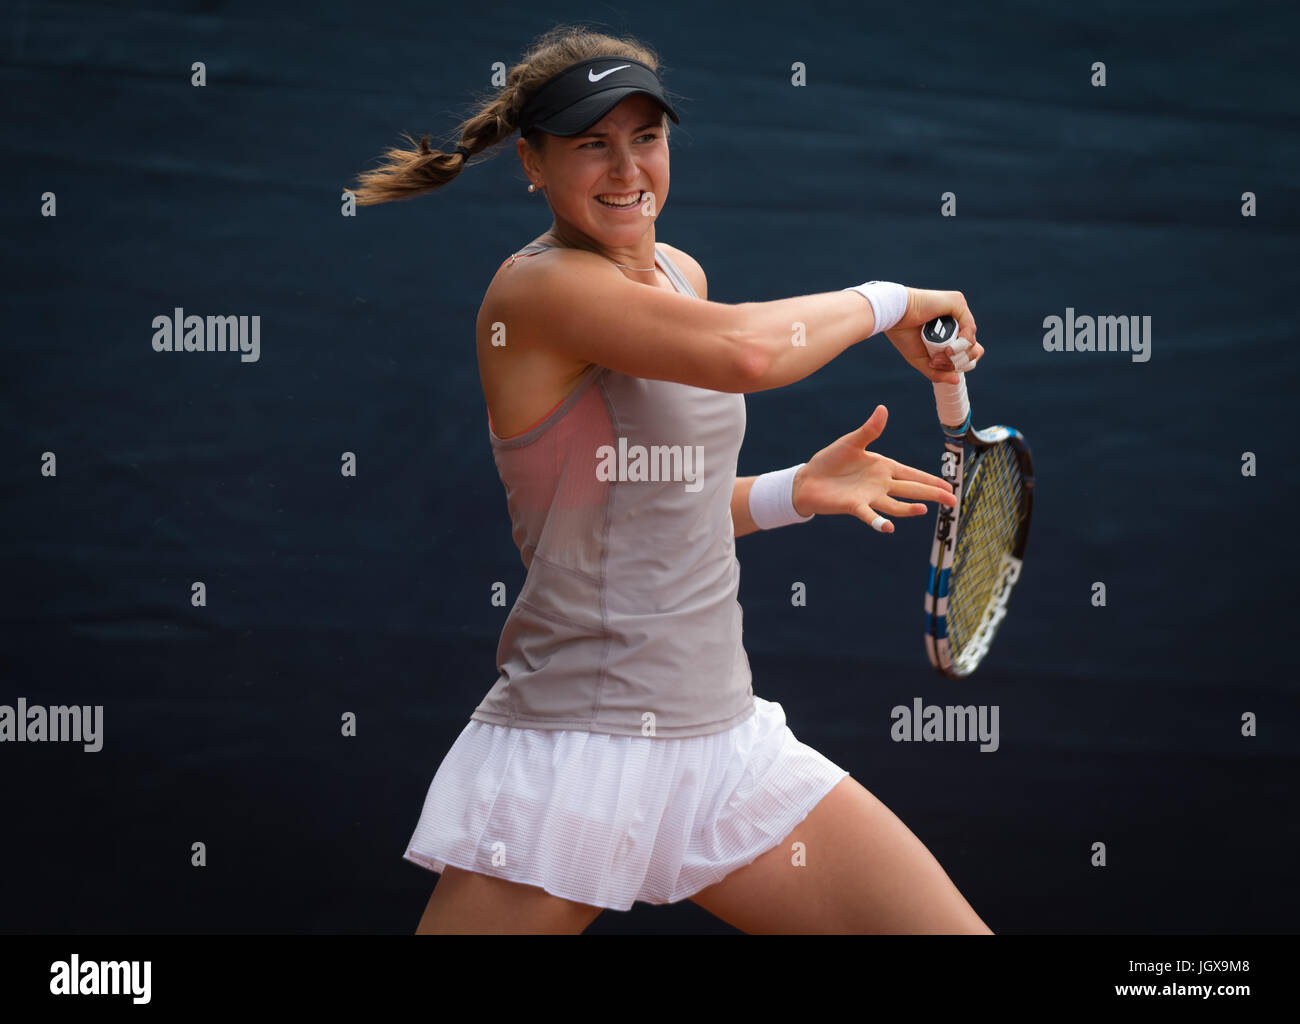 Versmold, Germany. 11 July, 2017. Rebecca Peterson at the 2017 Reinert Open ITF $60 tennis tournament © Jimmie48 Photography/Alamy Live News Stock Photo